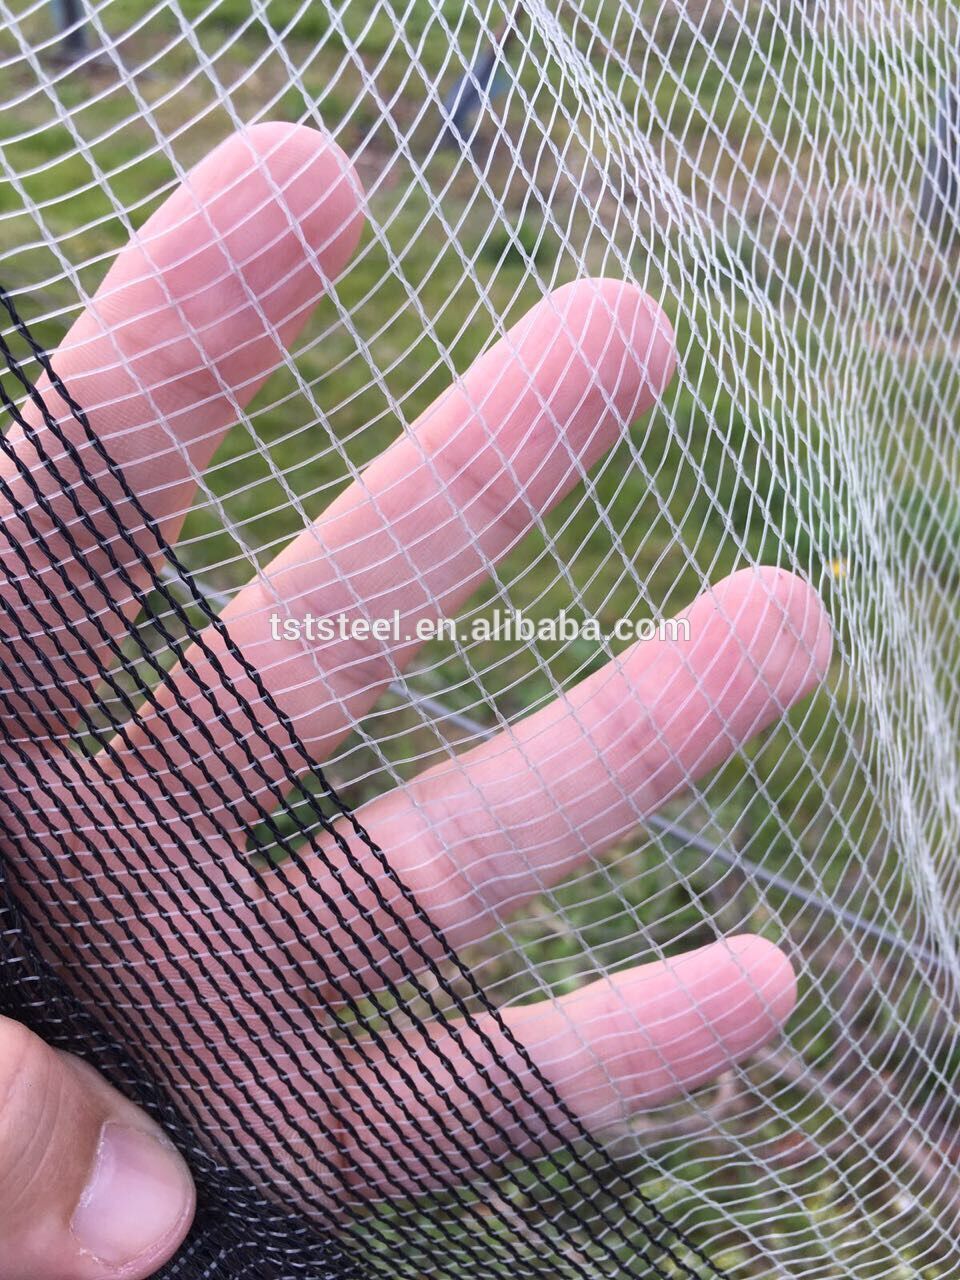 hail/insect plants protection net for agriculture/hdpe agriculture vineyard plastic apple tree anti hail net